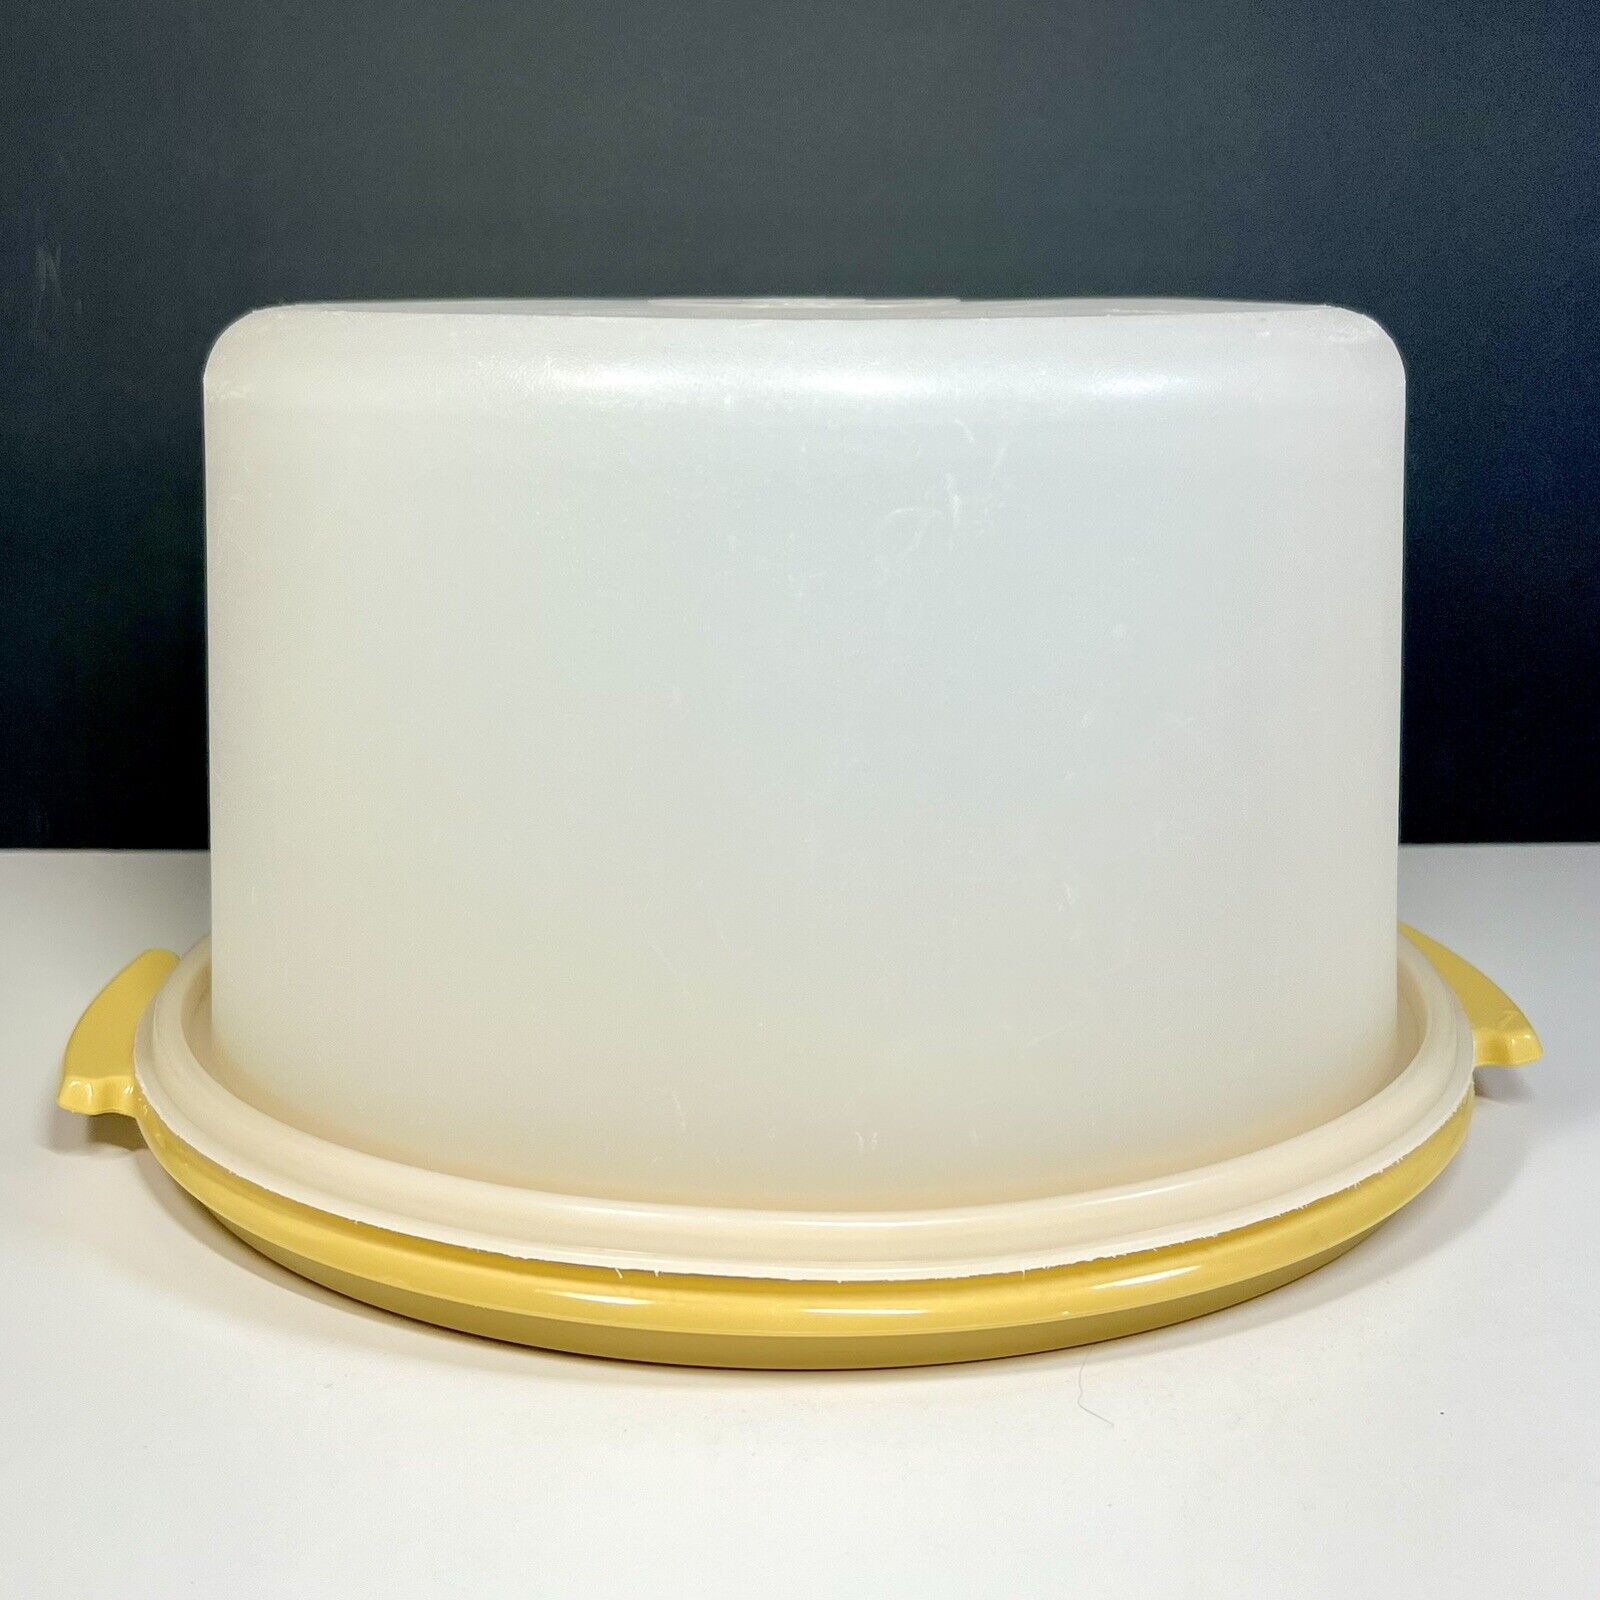 Vintage Tupperware Cake Carrier Taker Harvest Gold Base with Clear Top